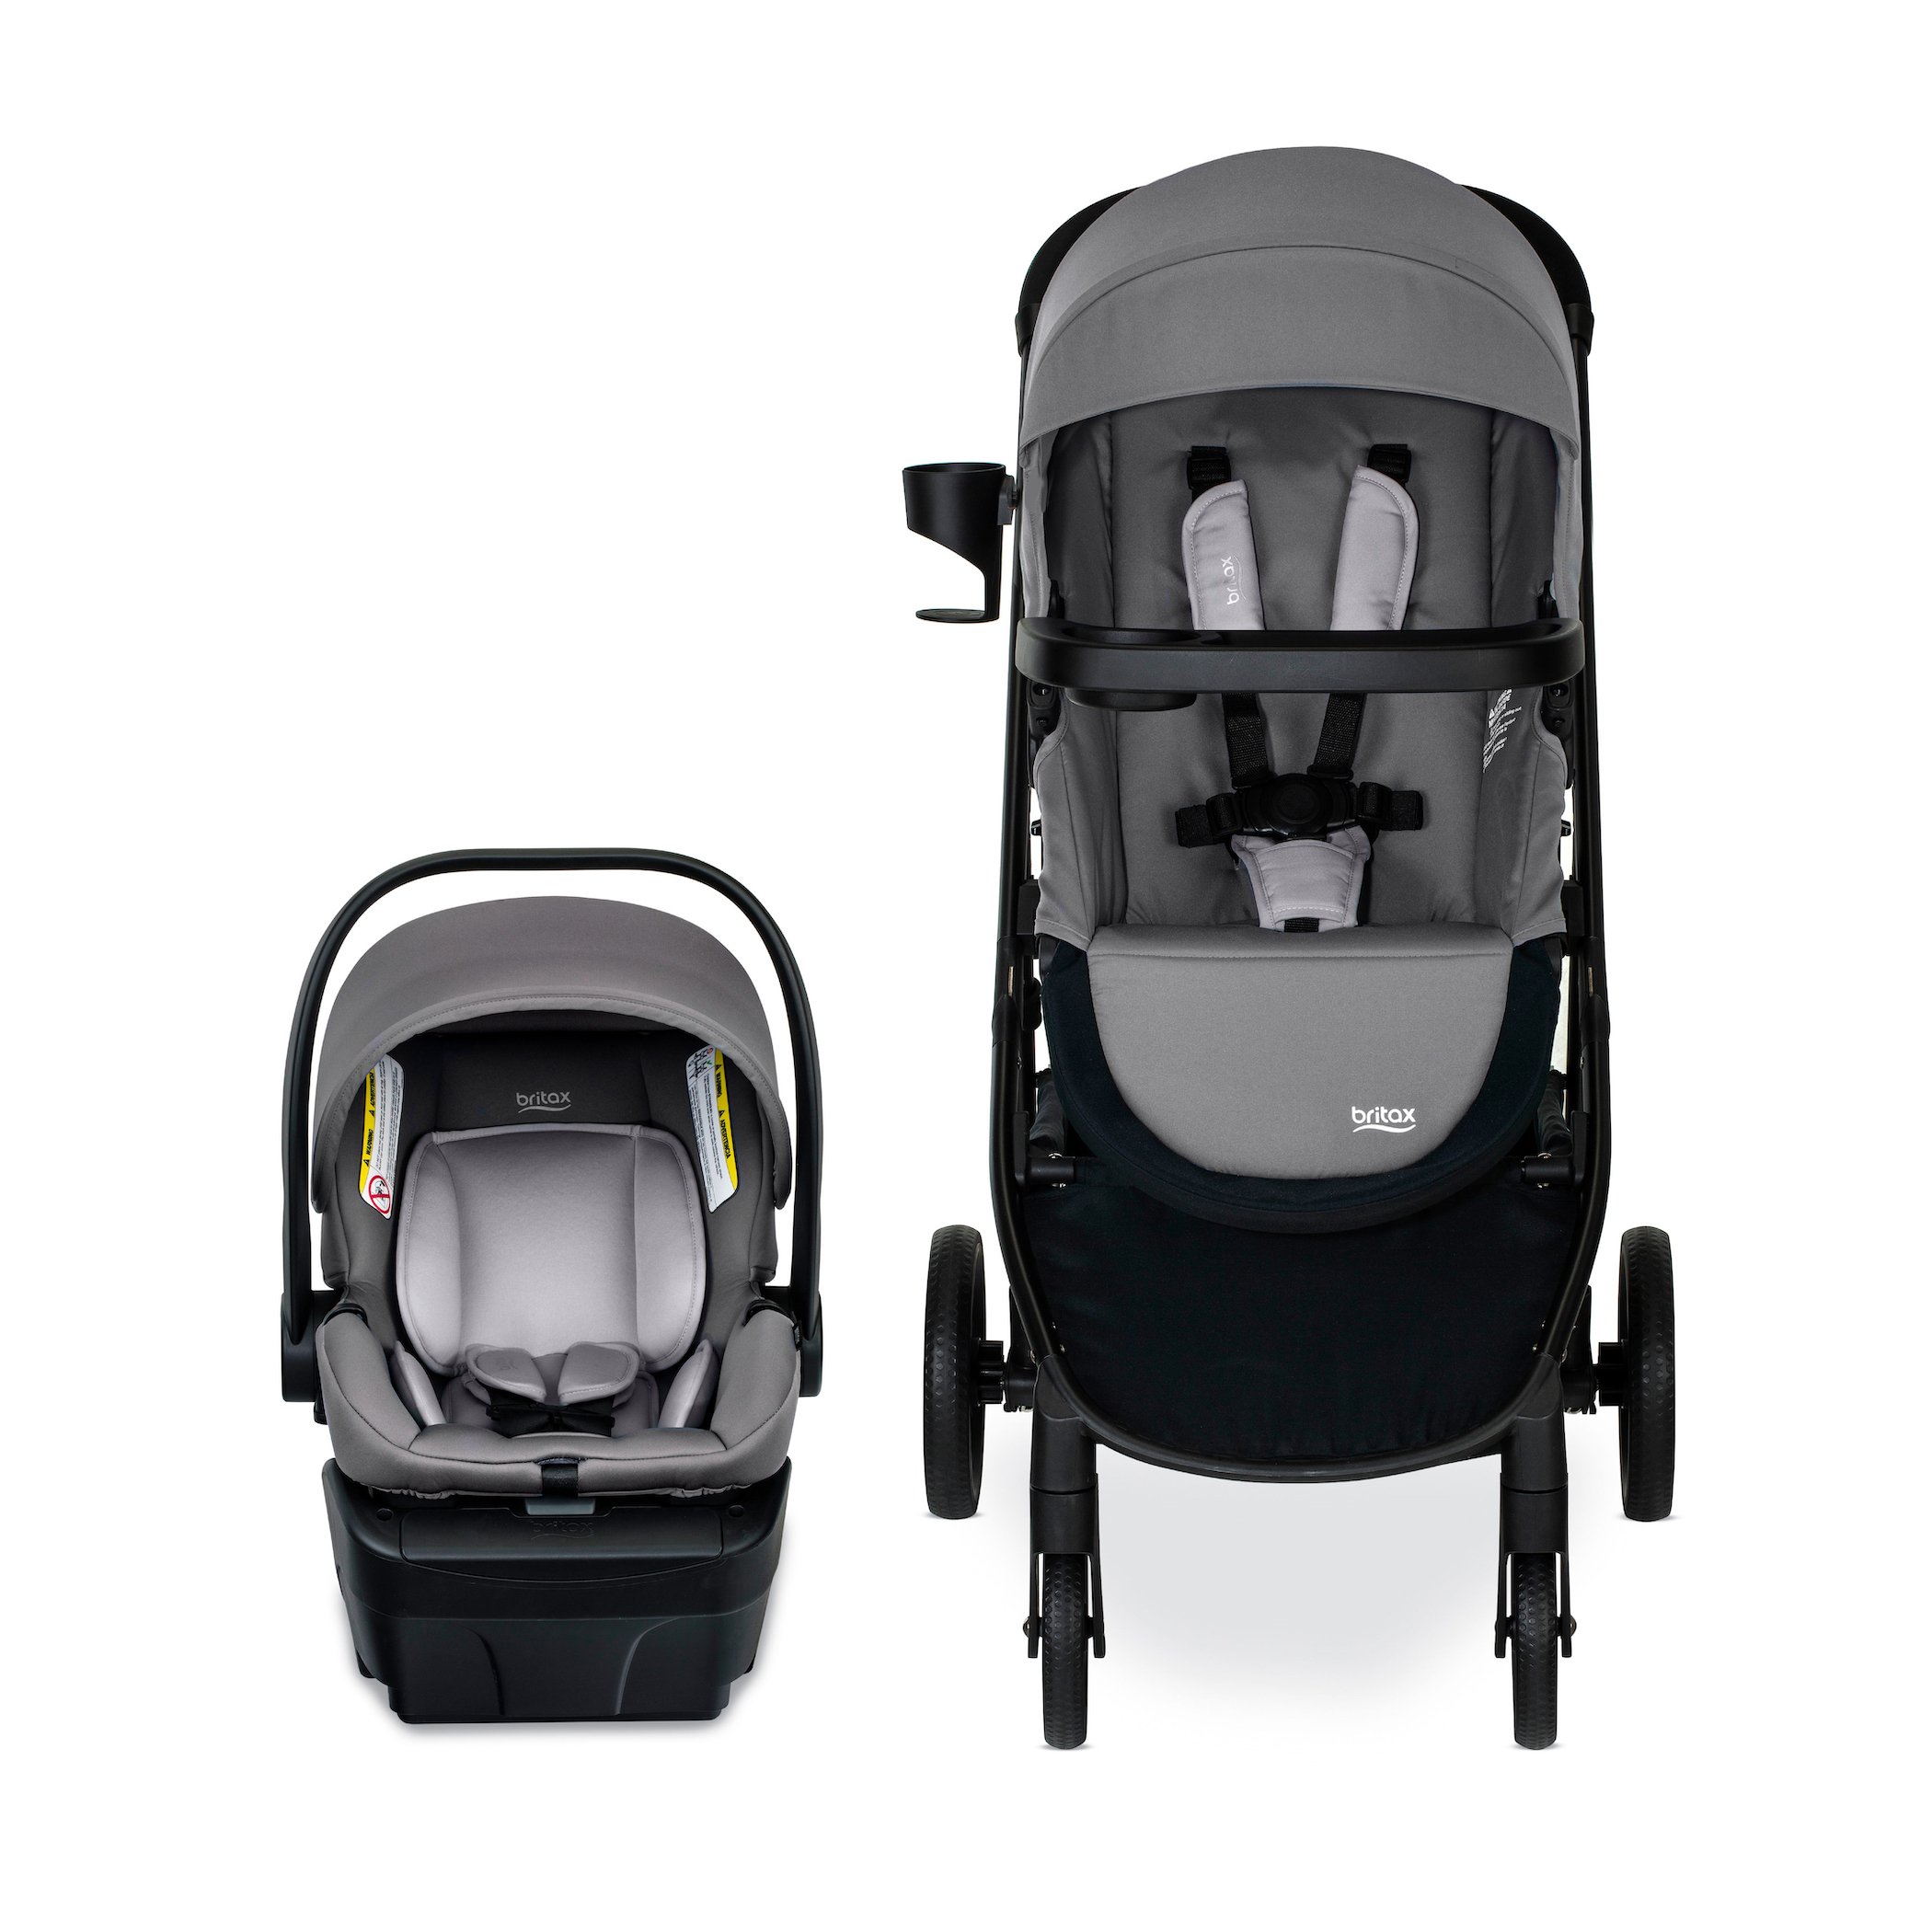 Graphite Glacier Center Facing Willow Infant Car Seat and Brook Stroller (Copy)